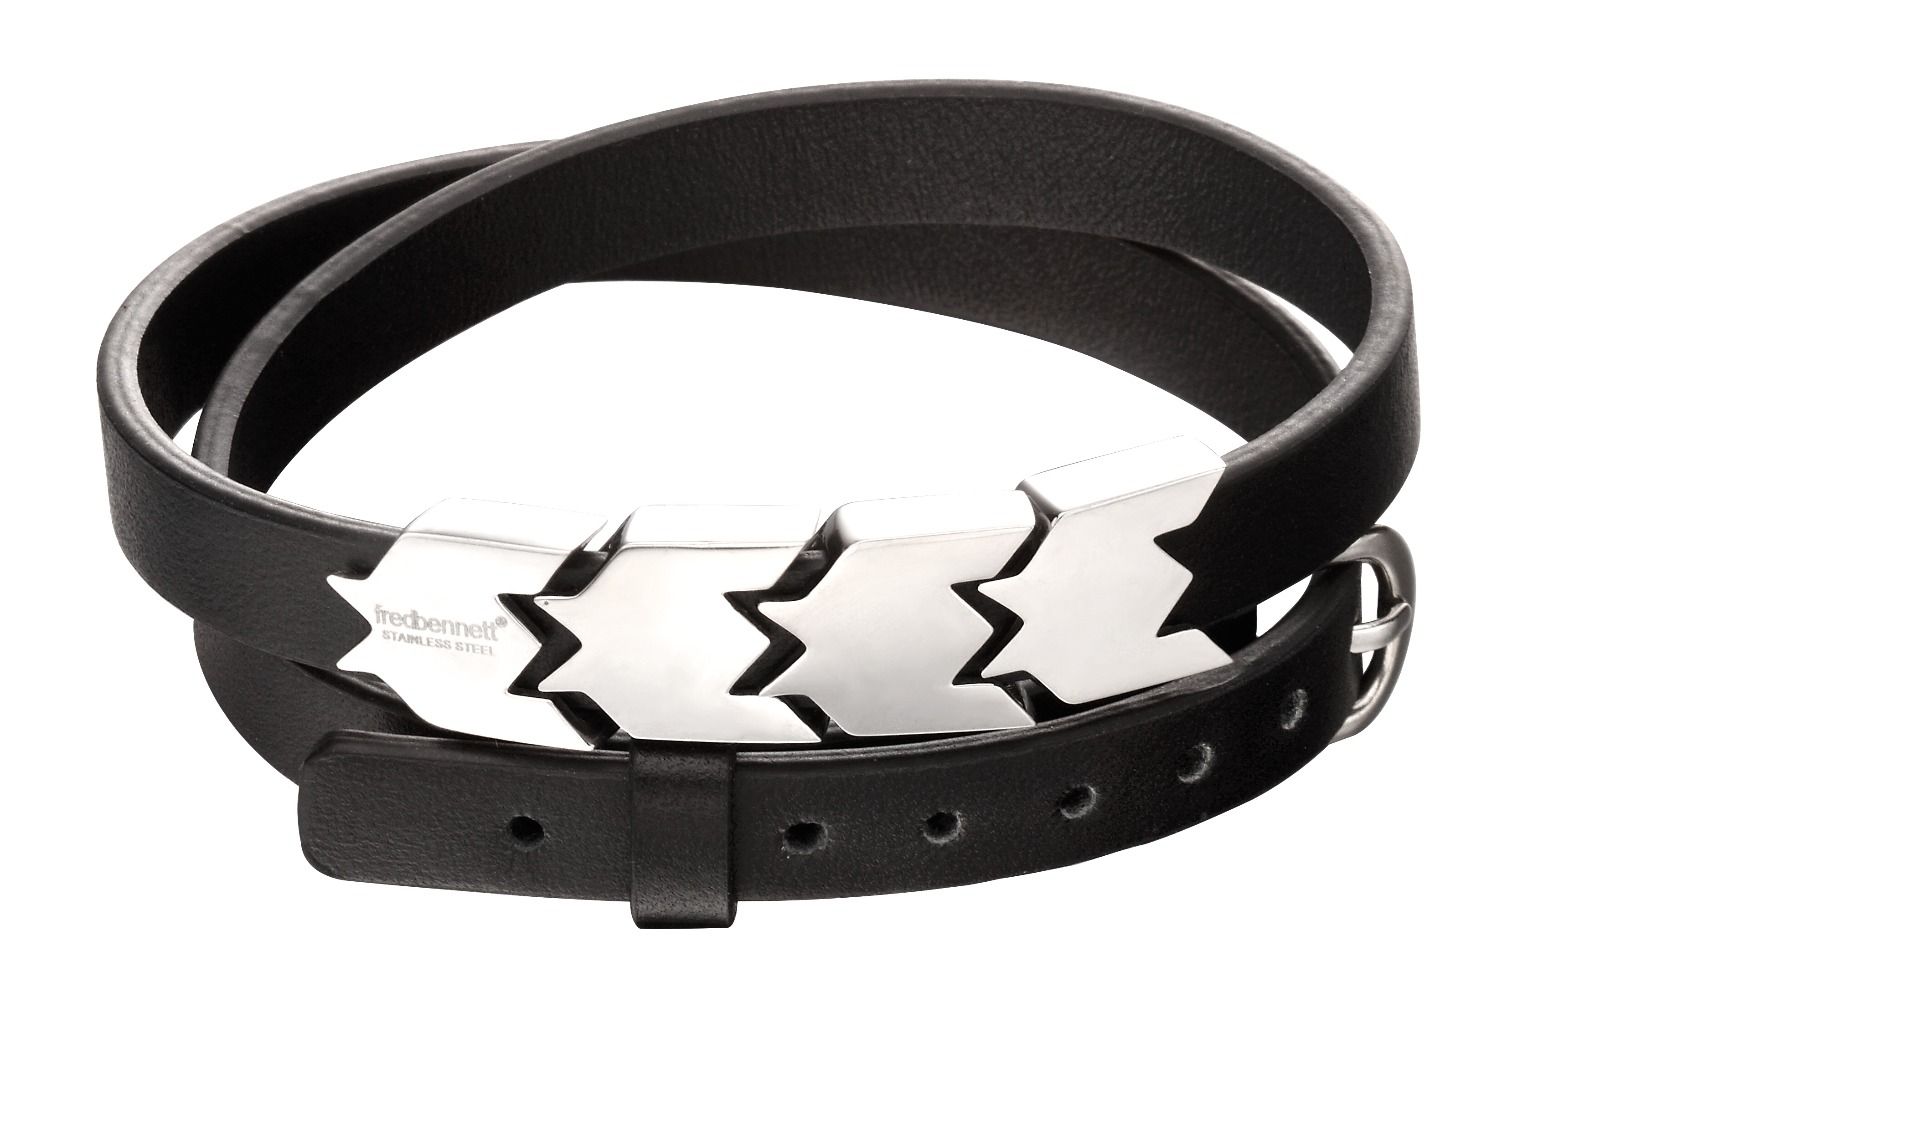 fredbennett fb Mens Stainless Steel Sliding Bead & Black Leather Wrapping Bracelet with Buckle Clasp Length 35cmDesign: Add an edgy look to your outfit with this sliding steel bead wrap around bracelet. Worn as a double bracelet effect with a fun buckle clasp, this eye catching bracelet would make a great addition to many outfits.Composition: Made from stainless steel with a modern polished finish and real leather.Dimensions: Charms height 14mm, Width of charms 11mm, width of leather 8mm, Depth 5mm, Item weight 20gFitting: This bracelet is 45cm in total length and fastens with a secure buckle clasp.Packaging: Comes complete with a branded presentation suede gift pouch - perfect for storing the item and ideal for gifting.